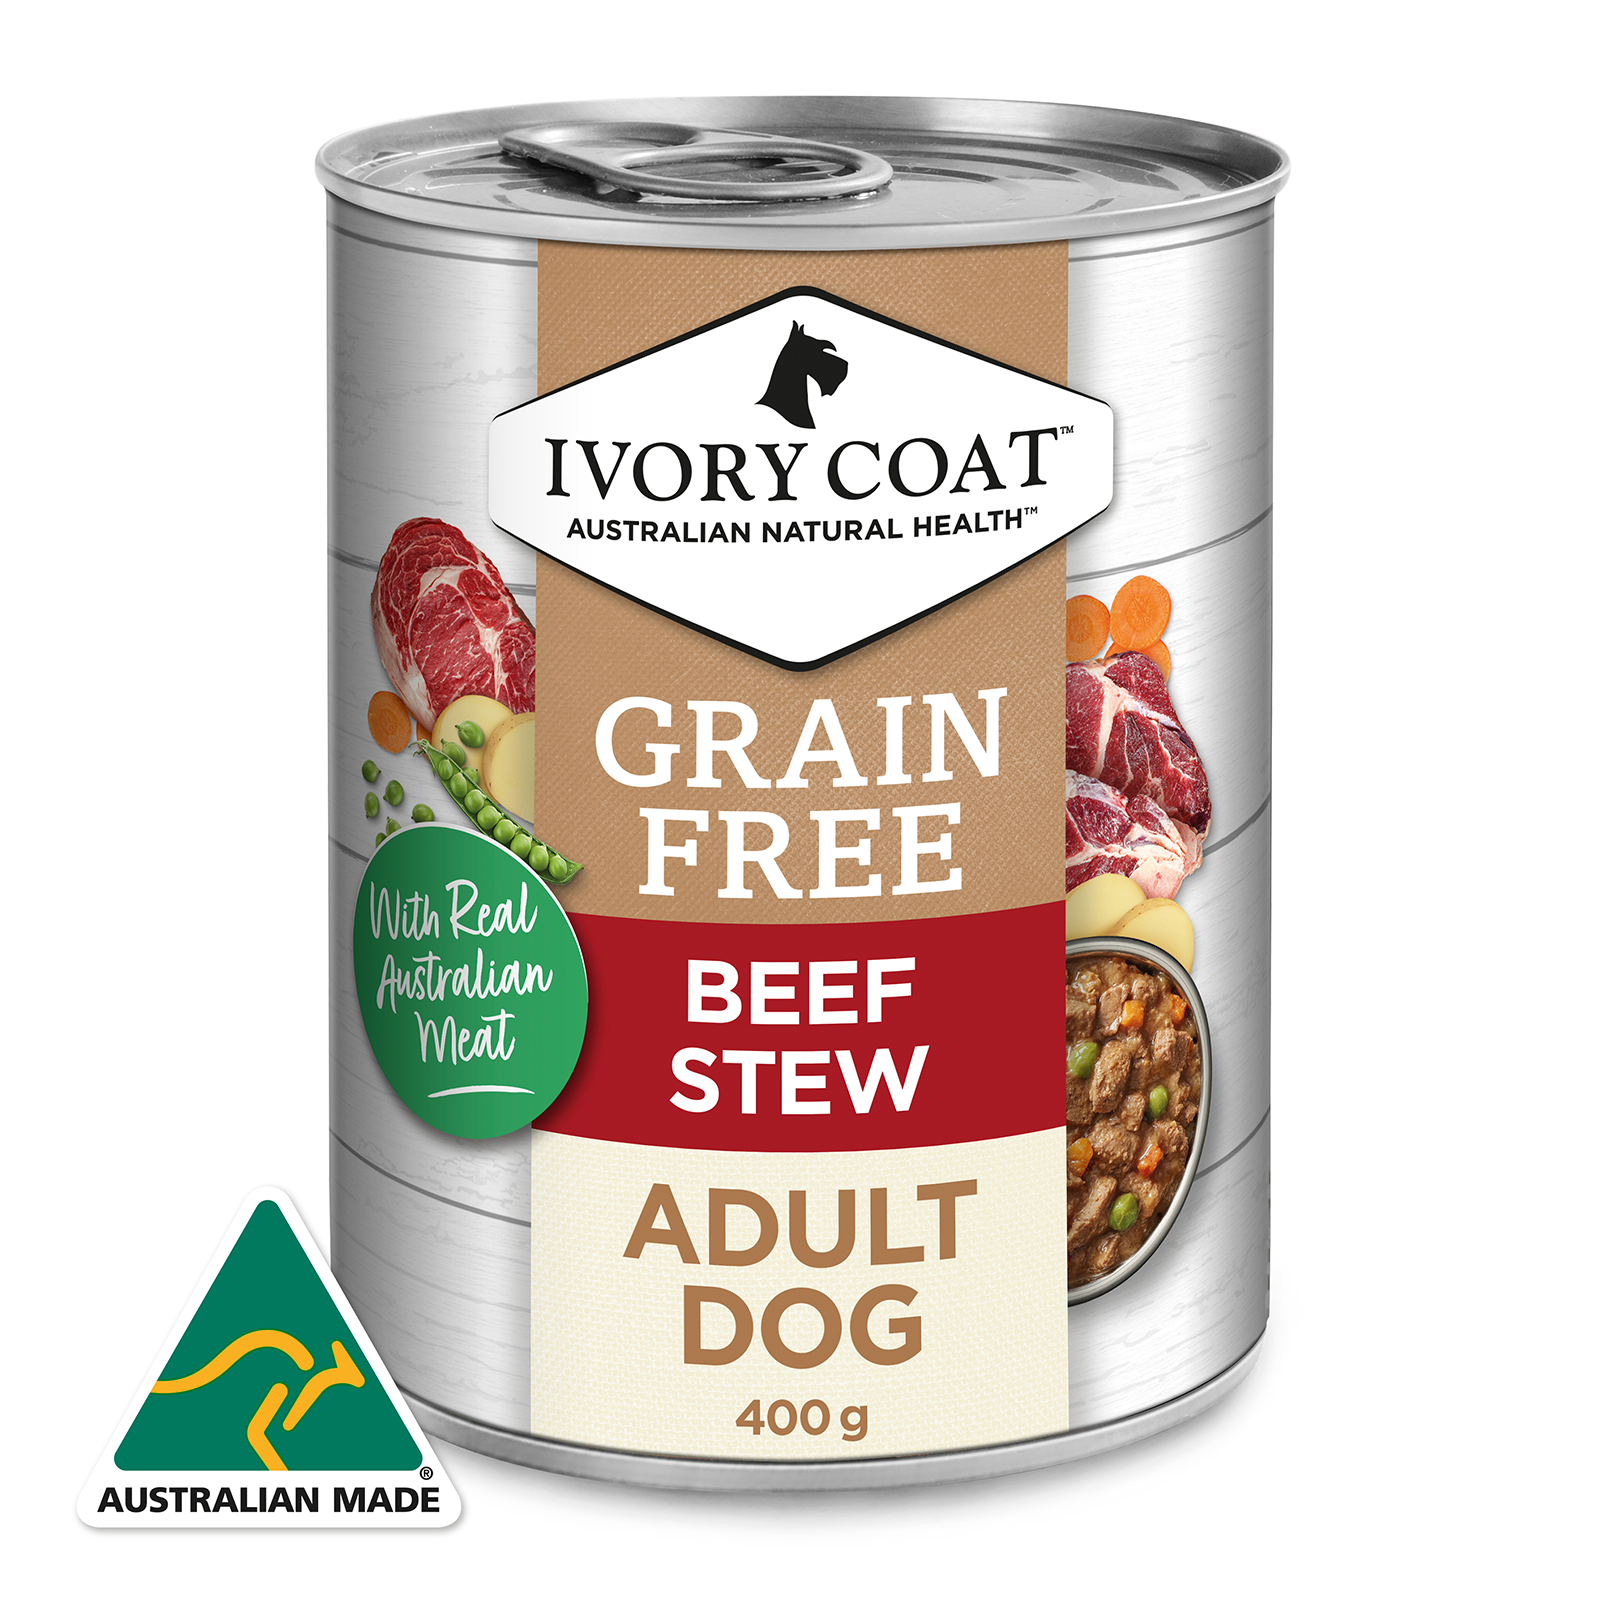 Ivory Coat Grain Free Dog Food Can Adult Beef Stew